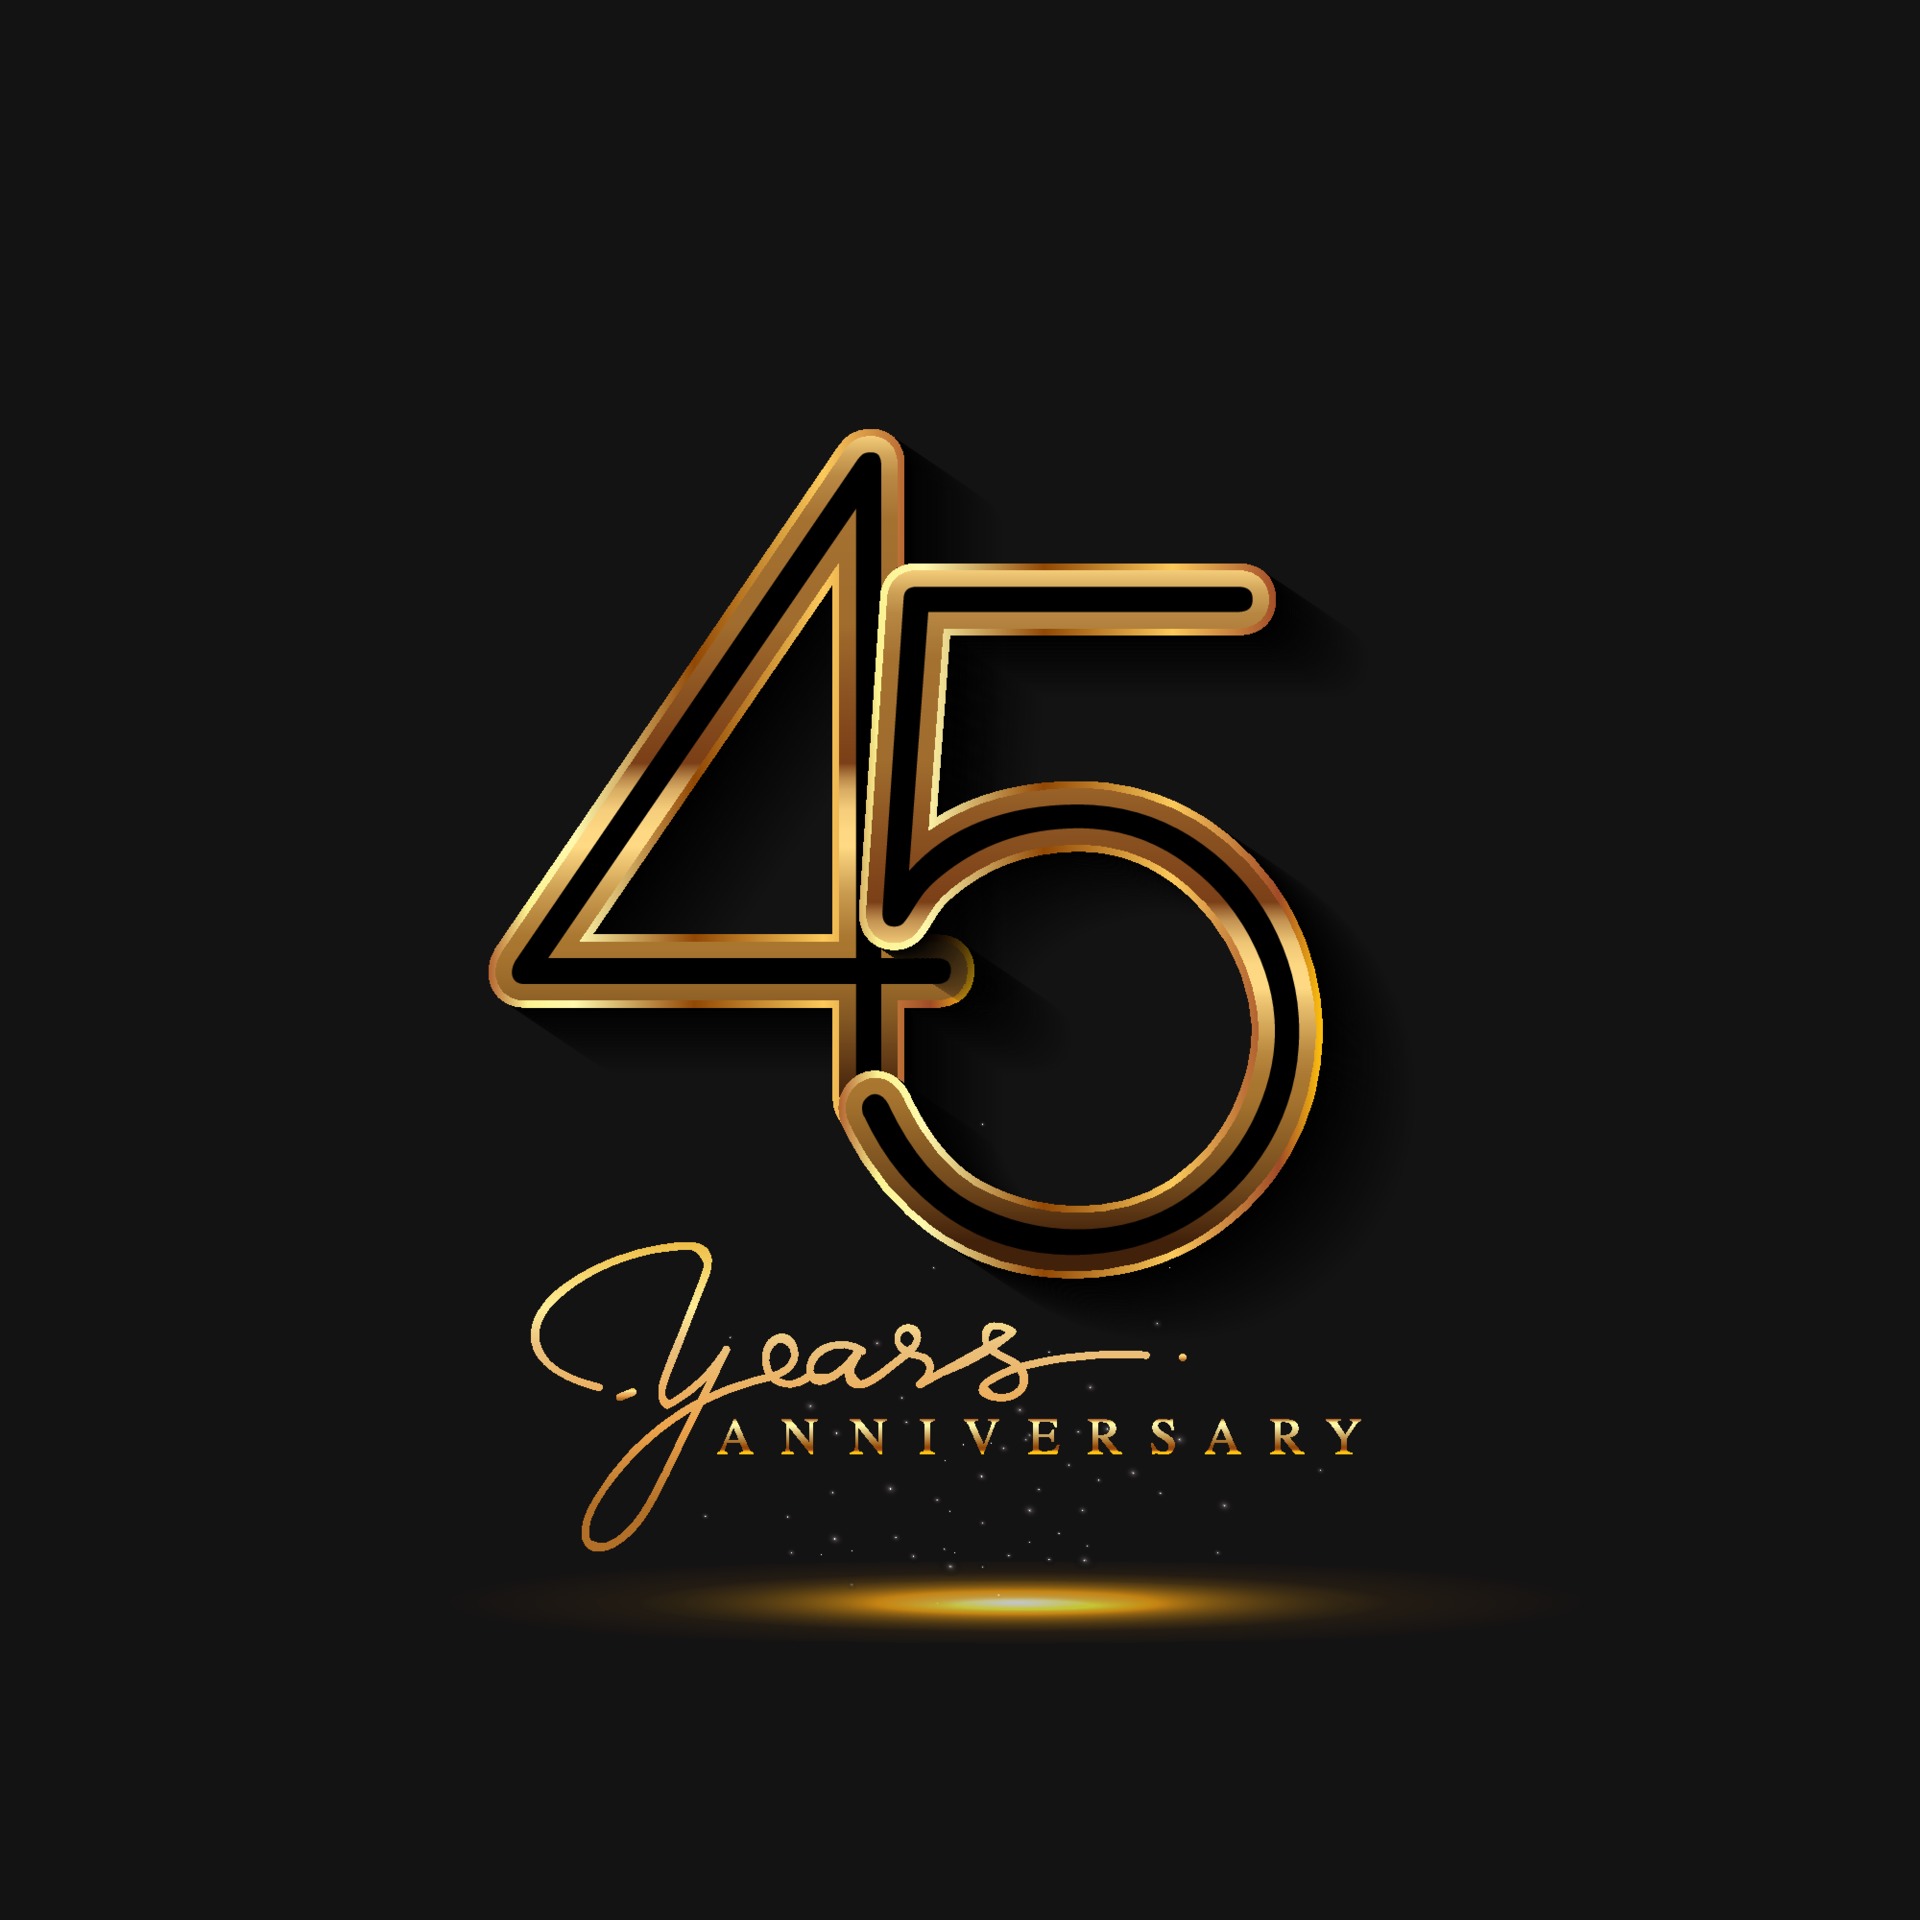 45 Years Anniversary Logo Golden Colored isolated on black background ...